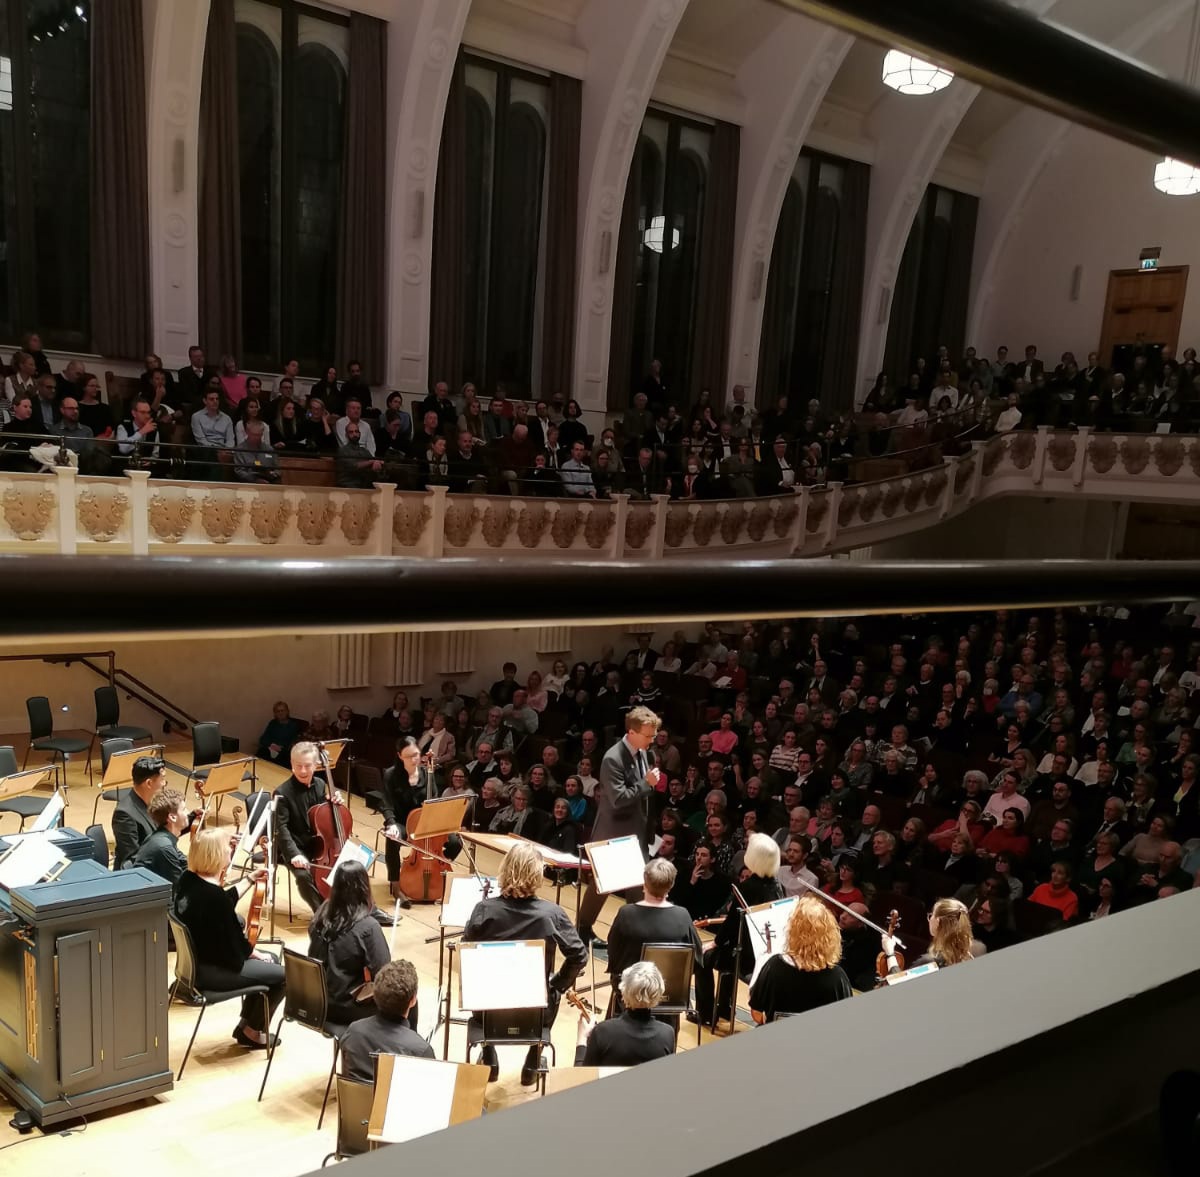 Orchestra and audience playing and listening at a concert